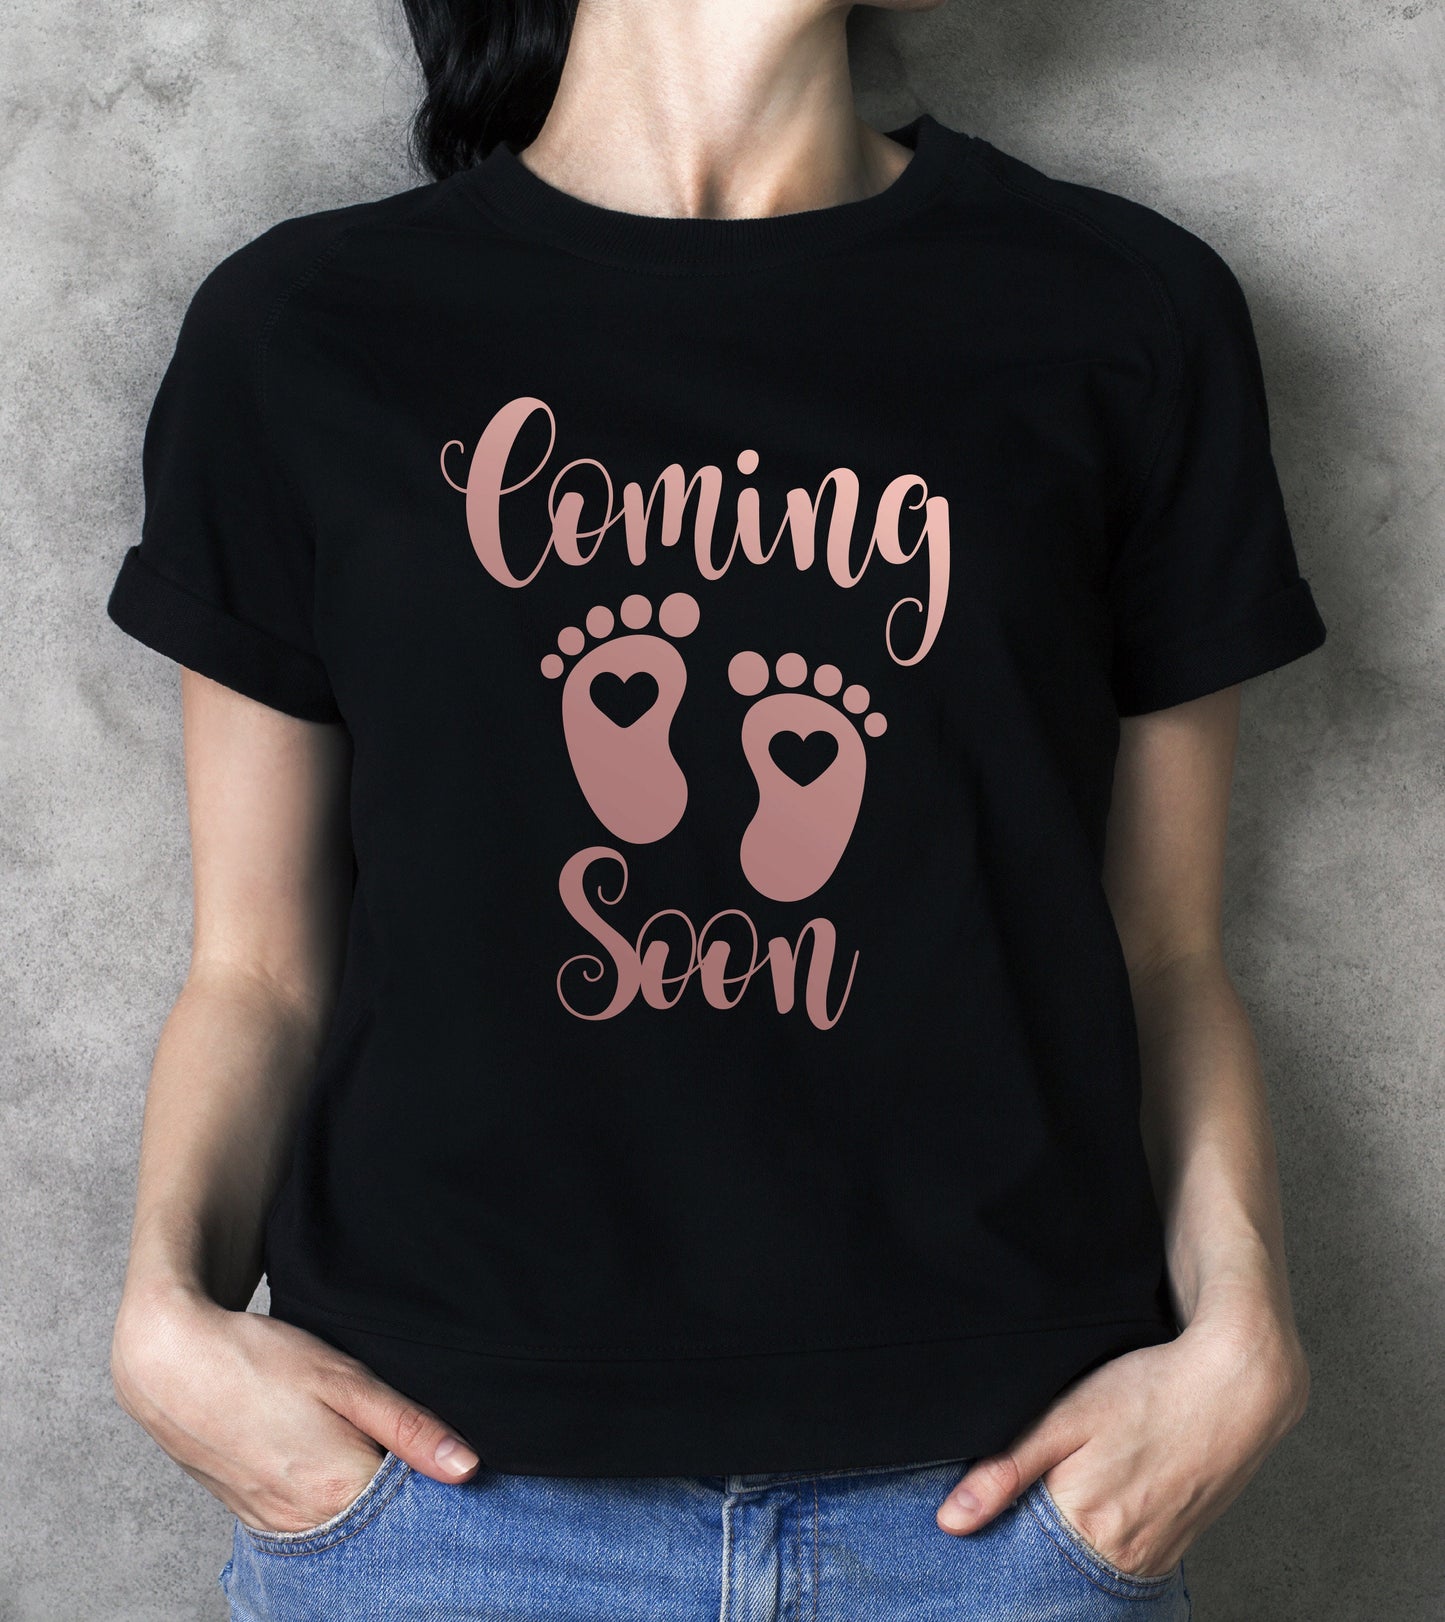 Coming Soon ROSE GOLD T-Shirt - Funny Pregnancy Announcement Tee Baby Footprints